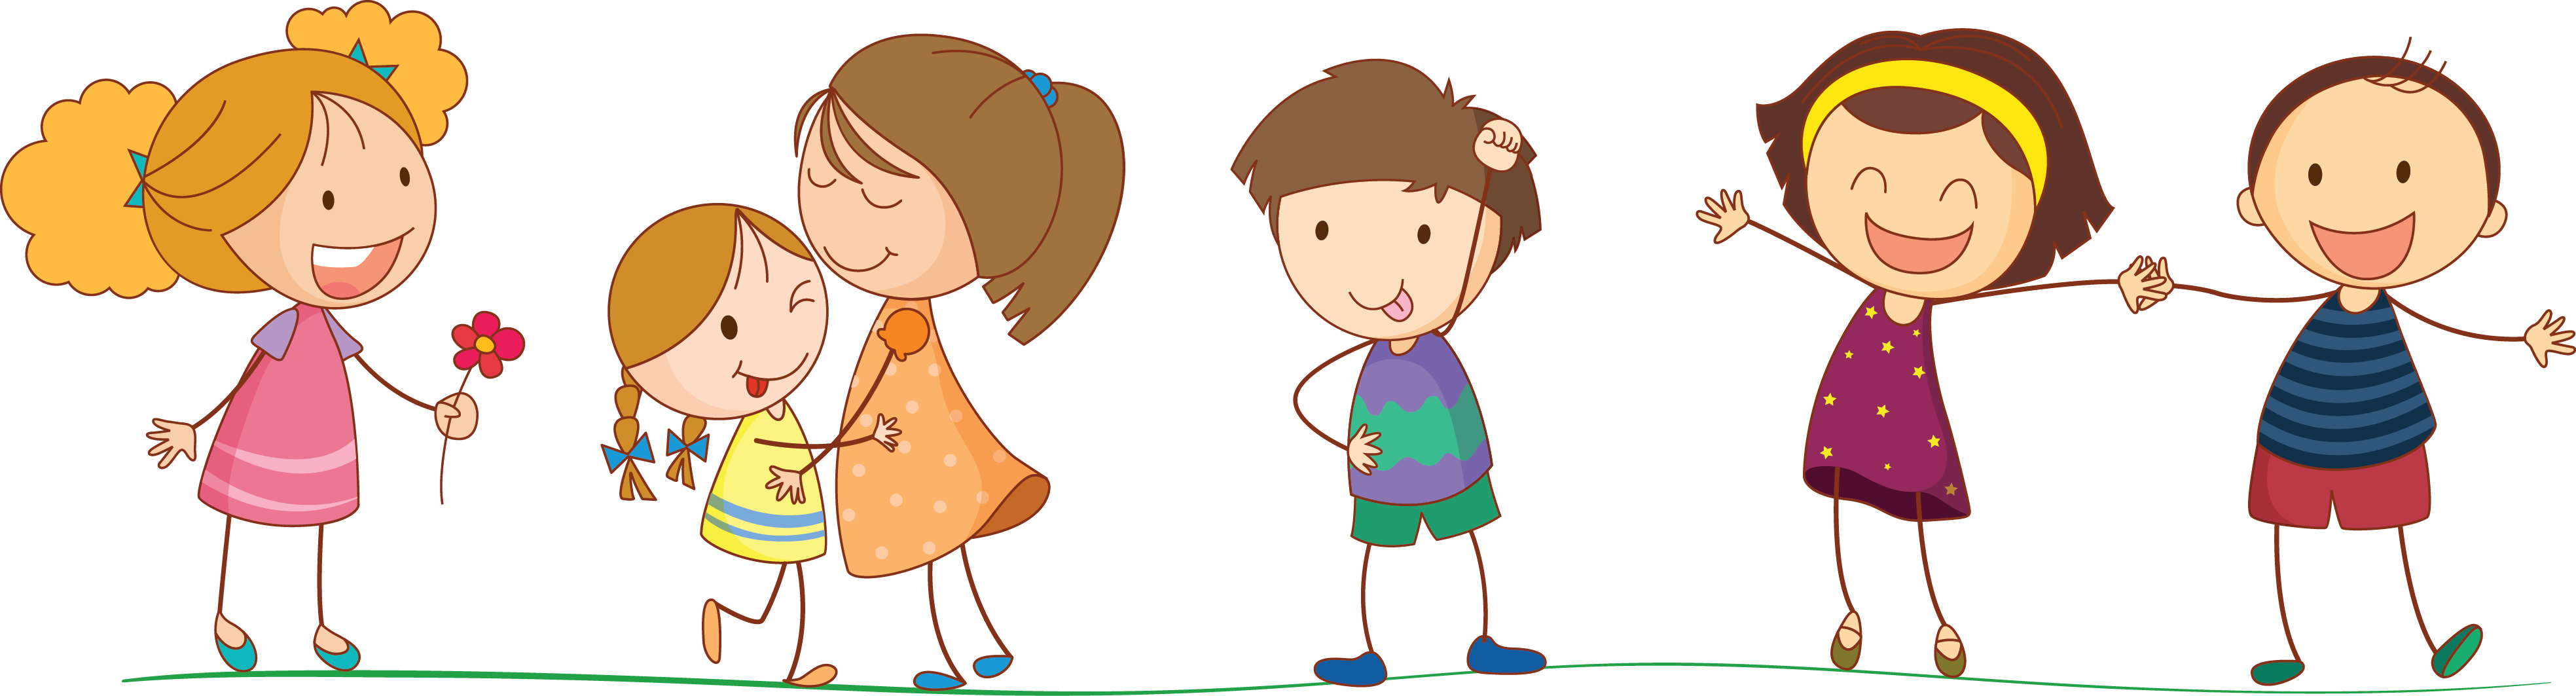 Download PNG image - Happy Children PNG HD Isolated 